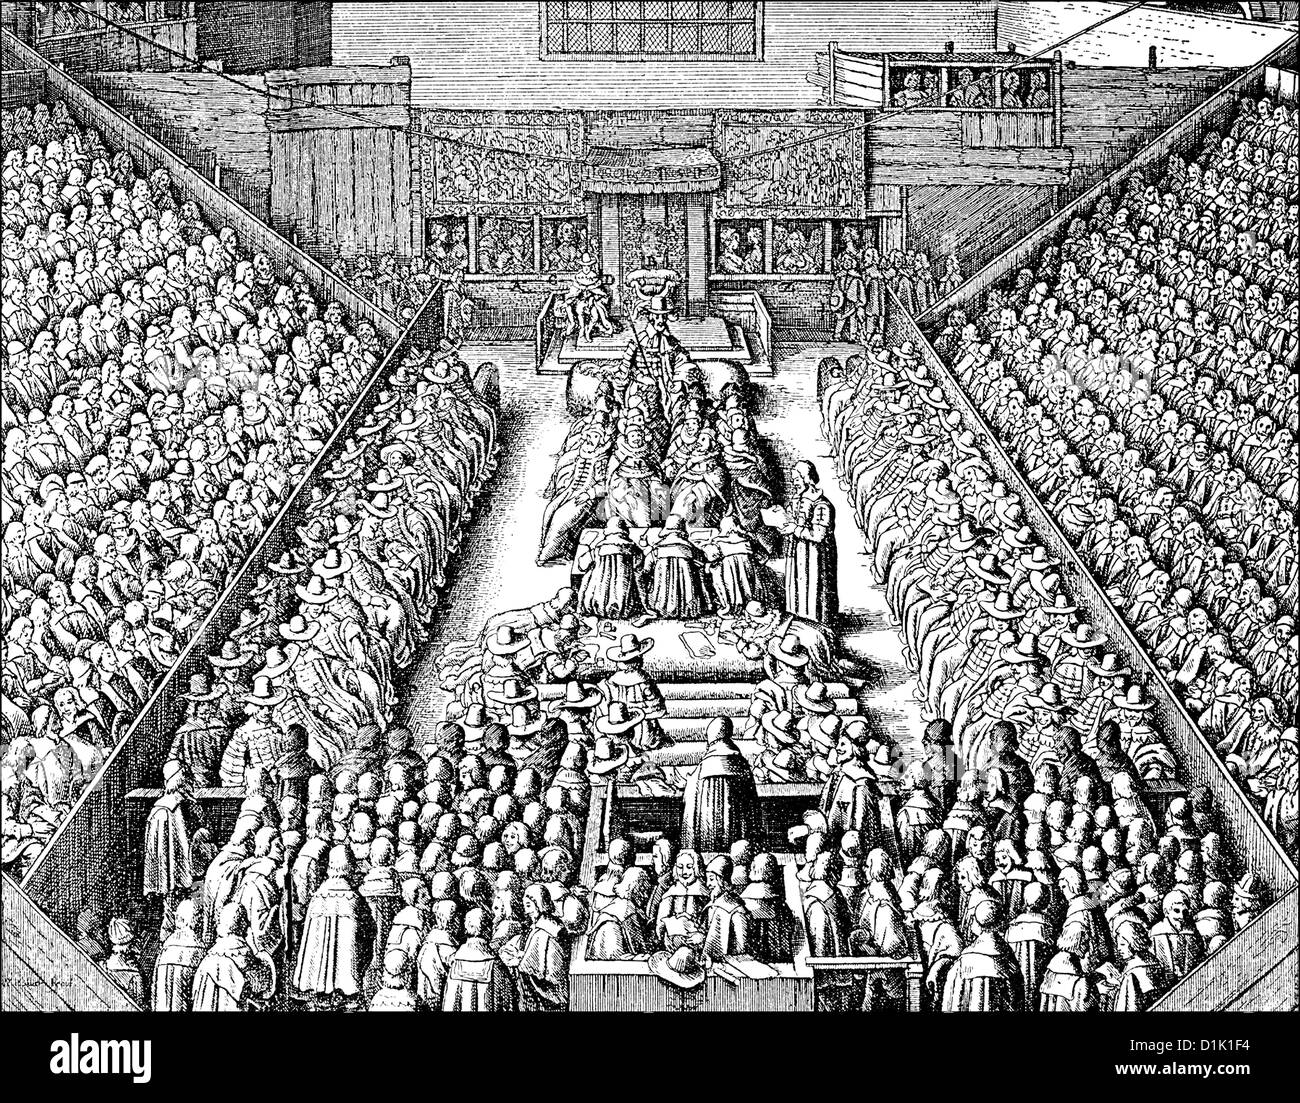 the English Parliament in the 17th century, the lawsuit of Thomas Wentworth, 1st Earl of Strafford, 1593 - 1641, Stock Photo